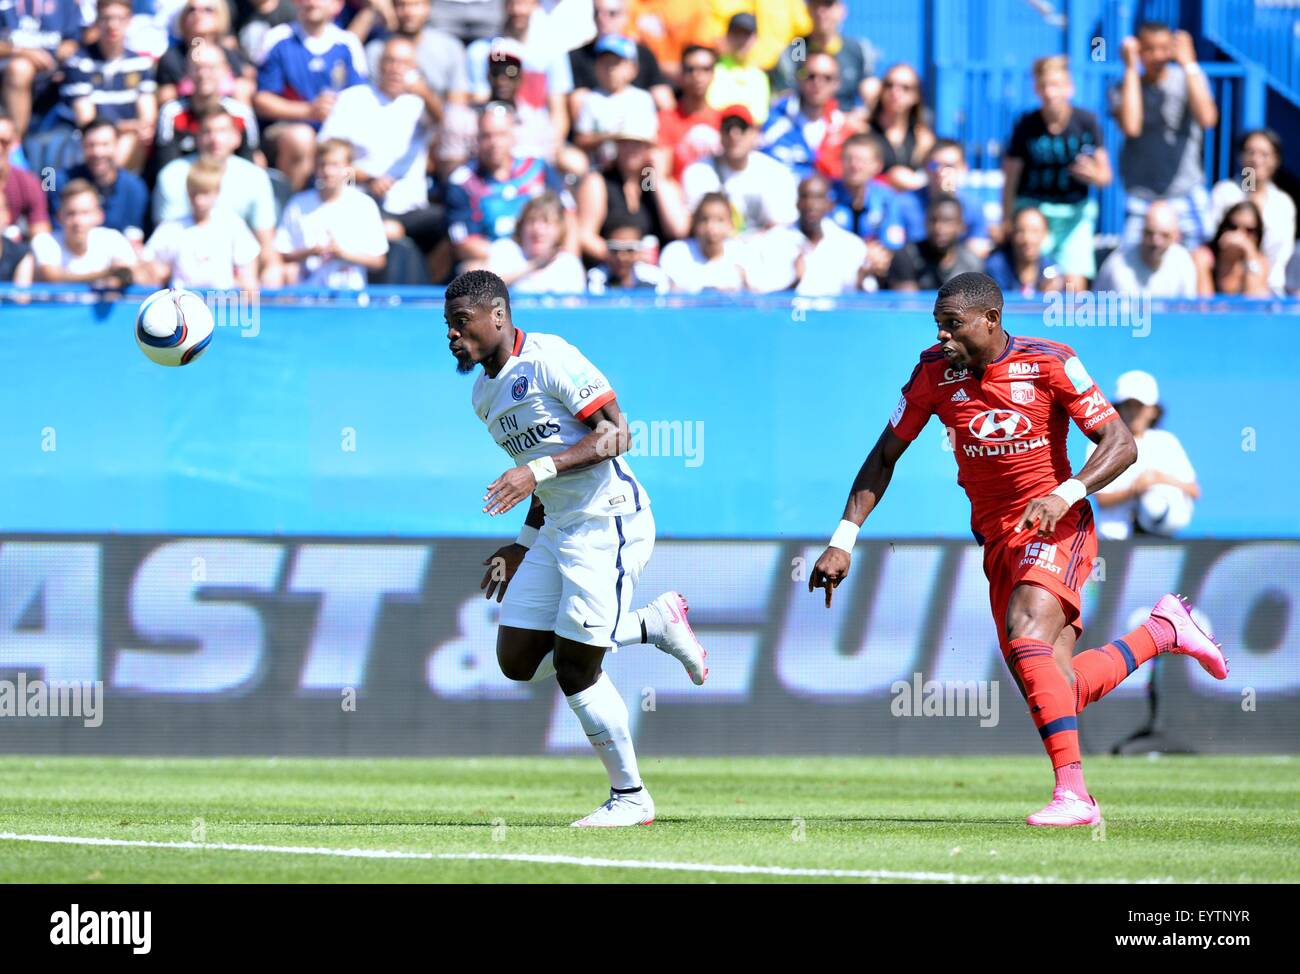 Montreal, Canada. 01st Aug, 2015. French Trophy of Champions match, between Paris St German and Lyon. Serge Aurier (psg) and Henri Bedimo (lyon) © Action Plus Sports/Alamy Live News Stock Photo